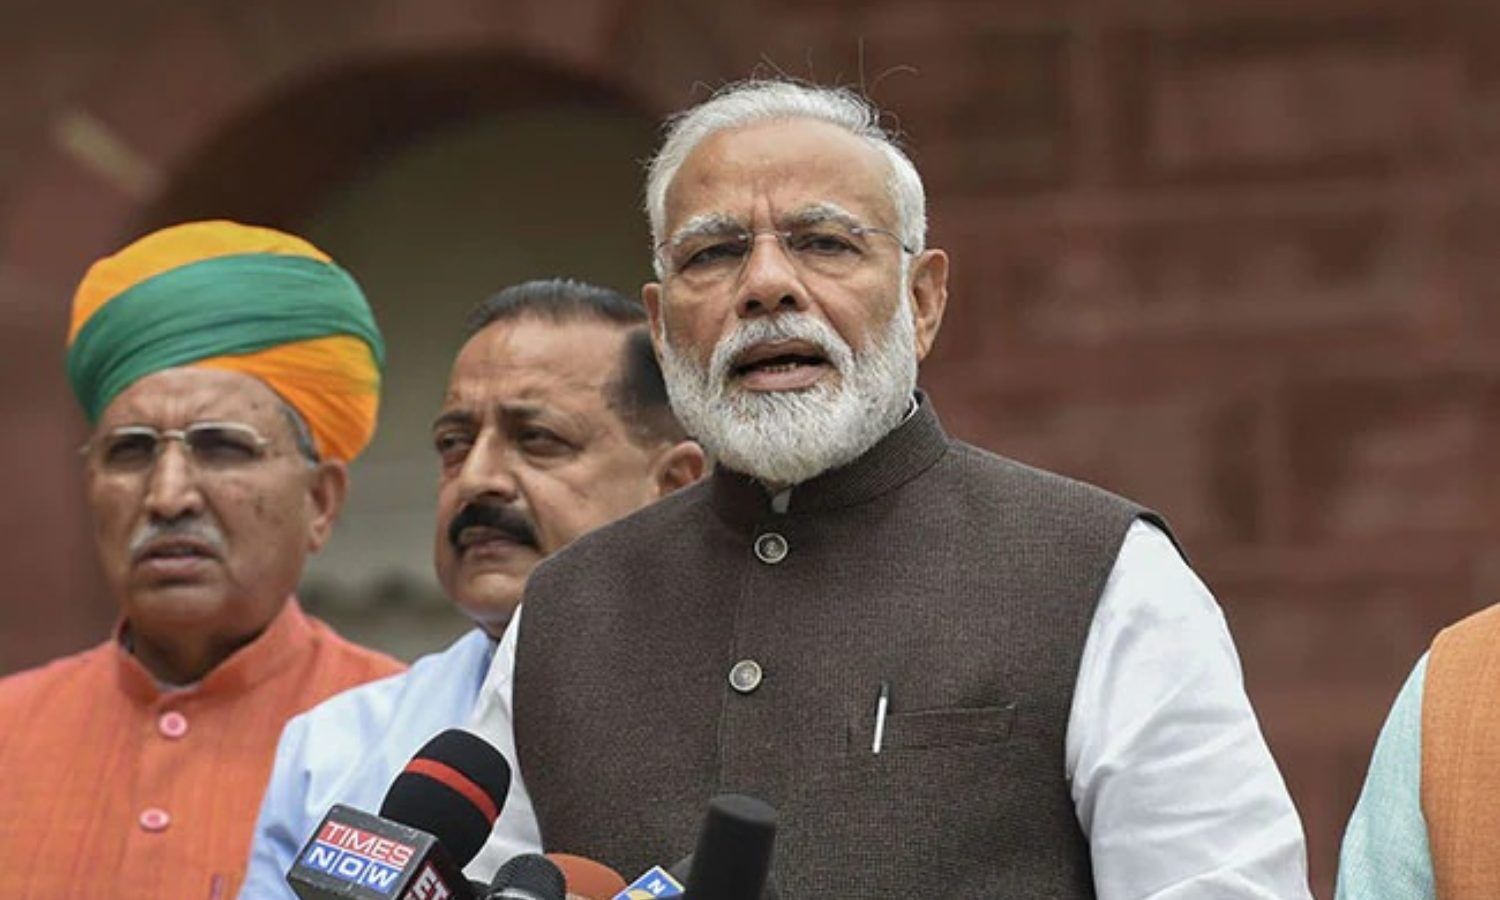 Parliament Winter Session: PM Modi appealed to the leaders, said, this is not a diplomatic event, let the house run